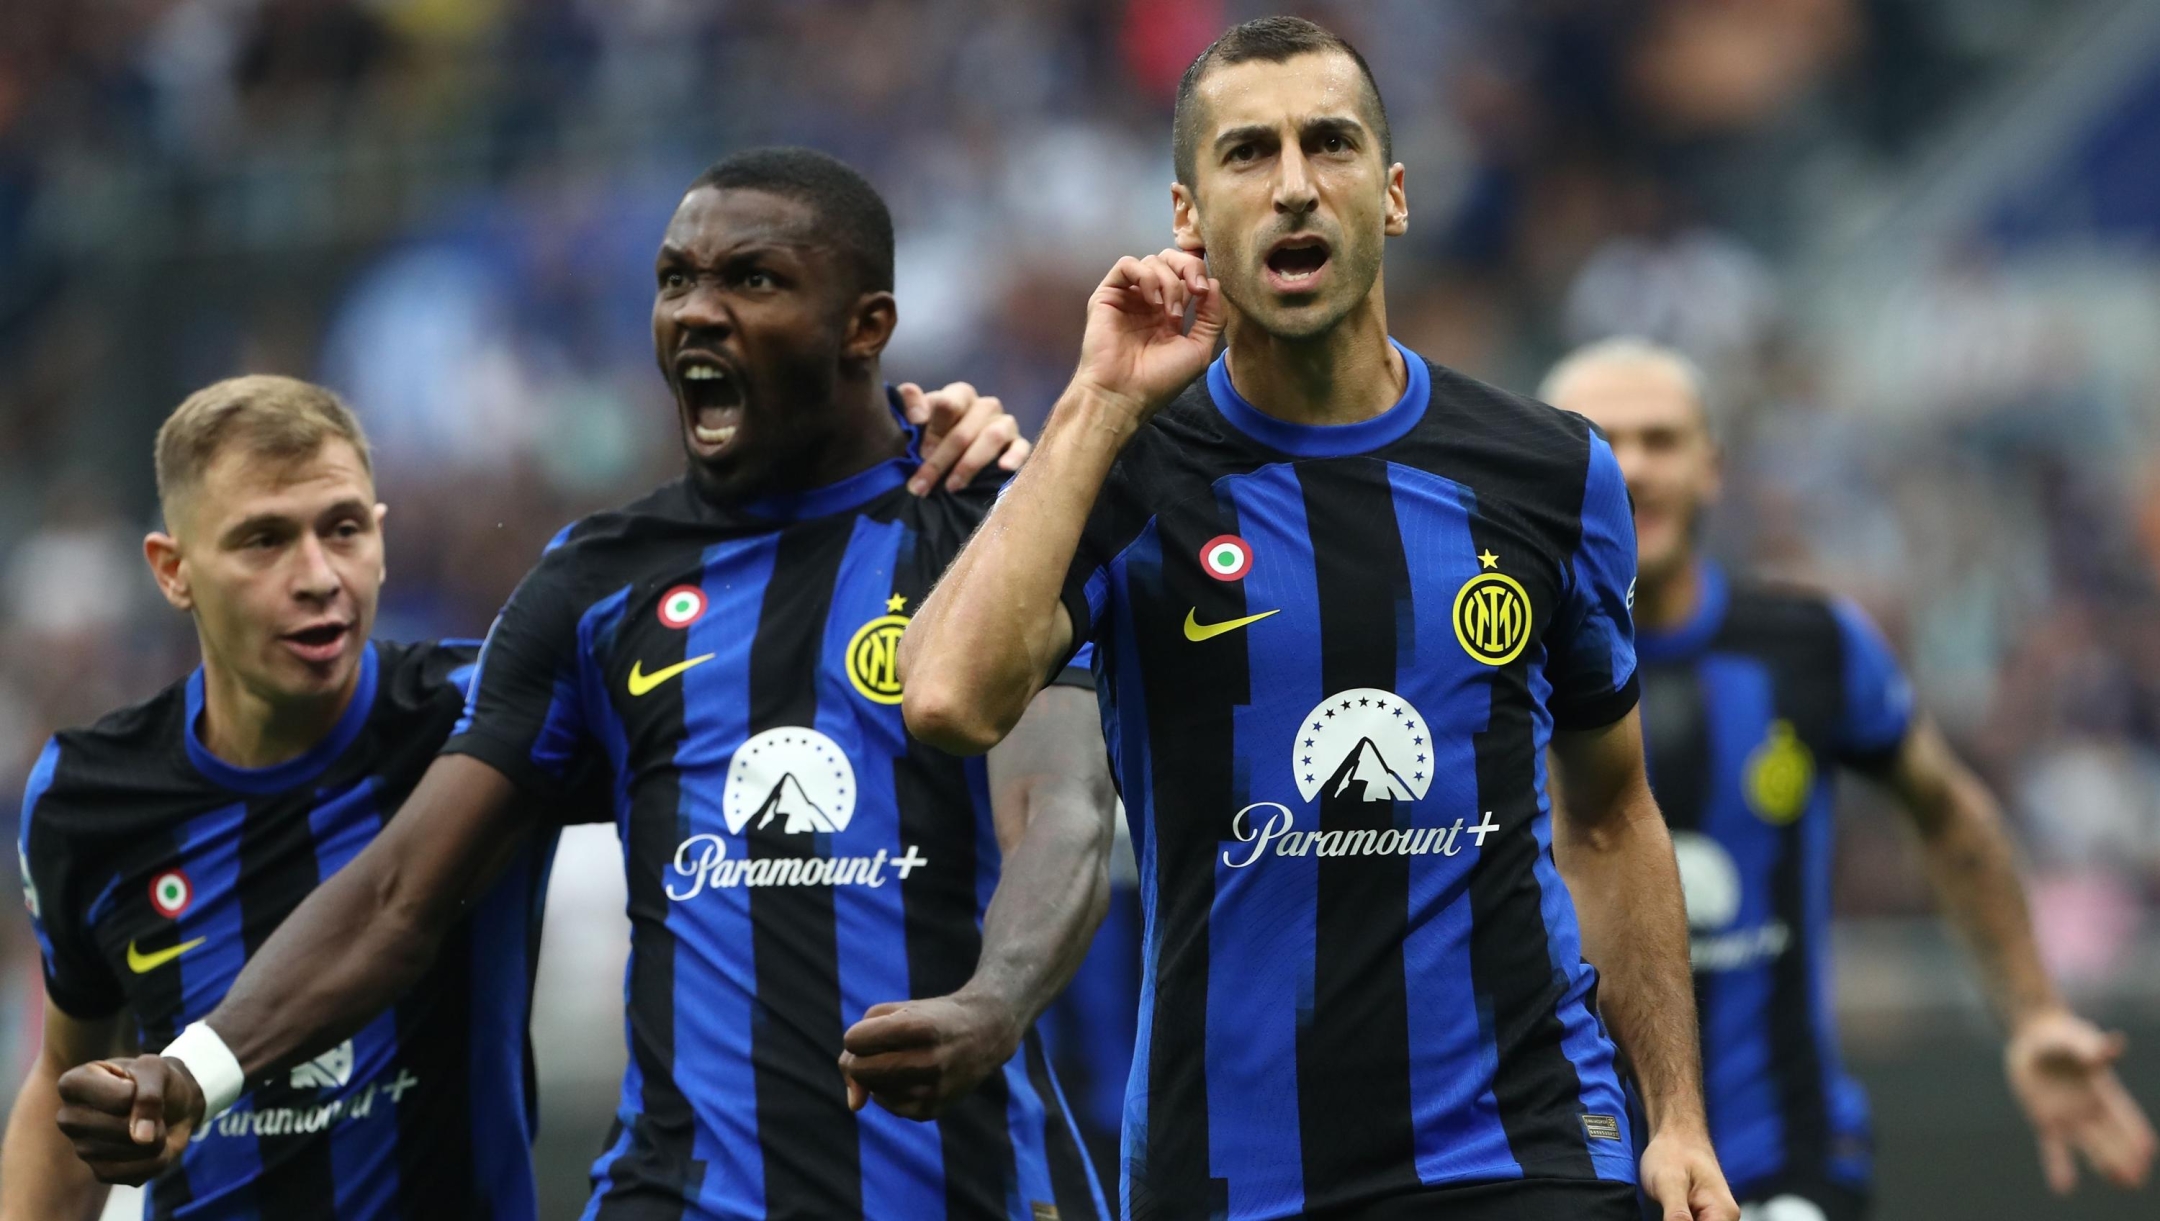 MILAN, ITALY - SEPTEMBER 16: Henrikh Mkhitaryan of FC Internazionale celebrates with his team-mate Marcus Thuram after scoring the opening goal during the Serie A TIM match between FC Internazionale and AC Milan at Stadio Giuseppe Meazza on September 16, 2023 in Milan, Italy. (Photo by Marco Luzzani/Getty Images)